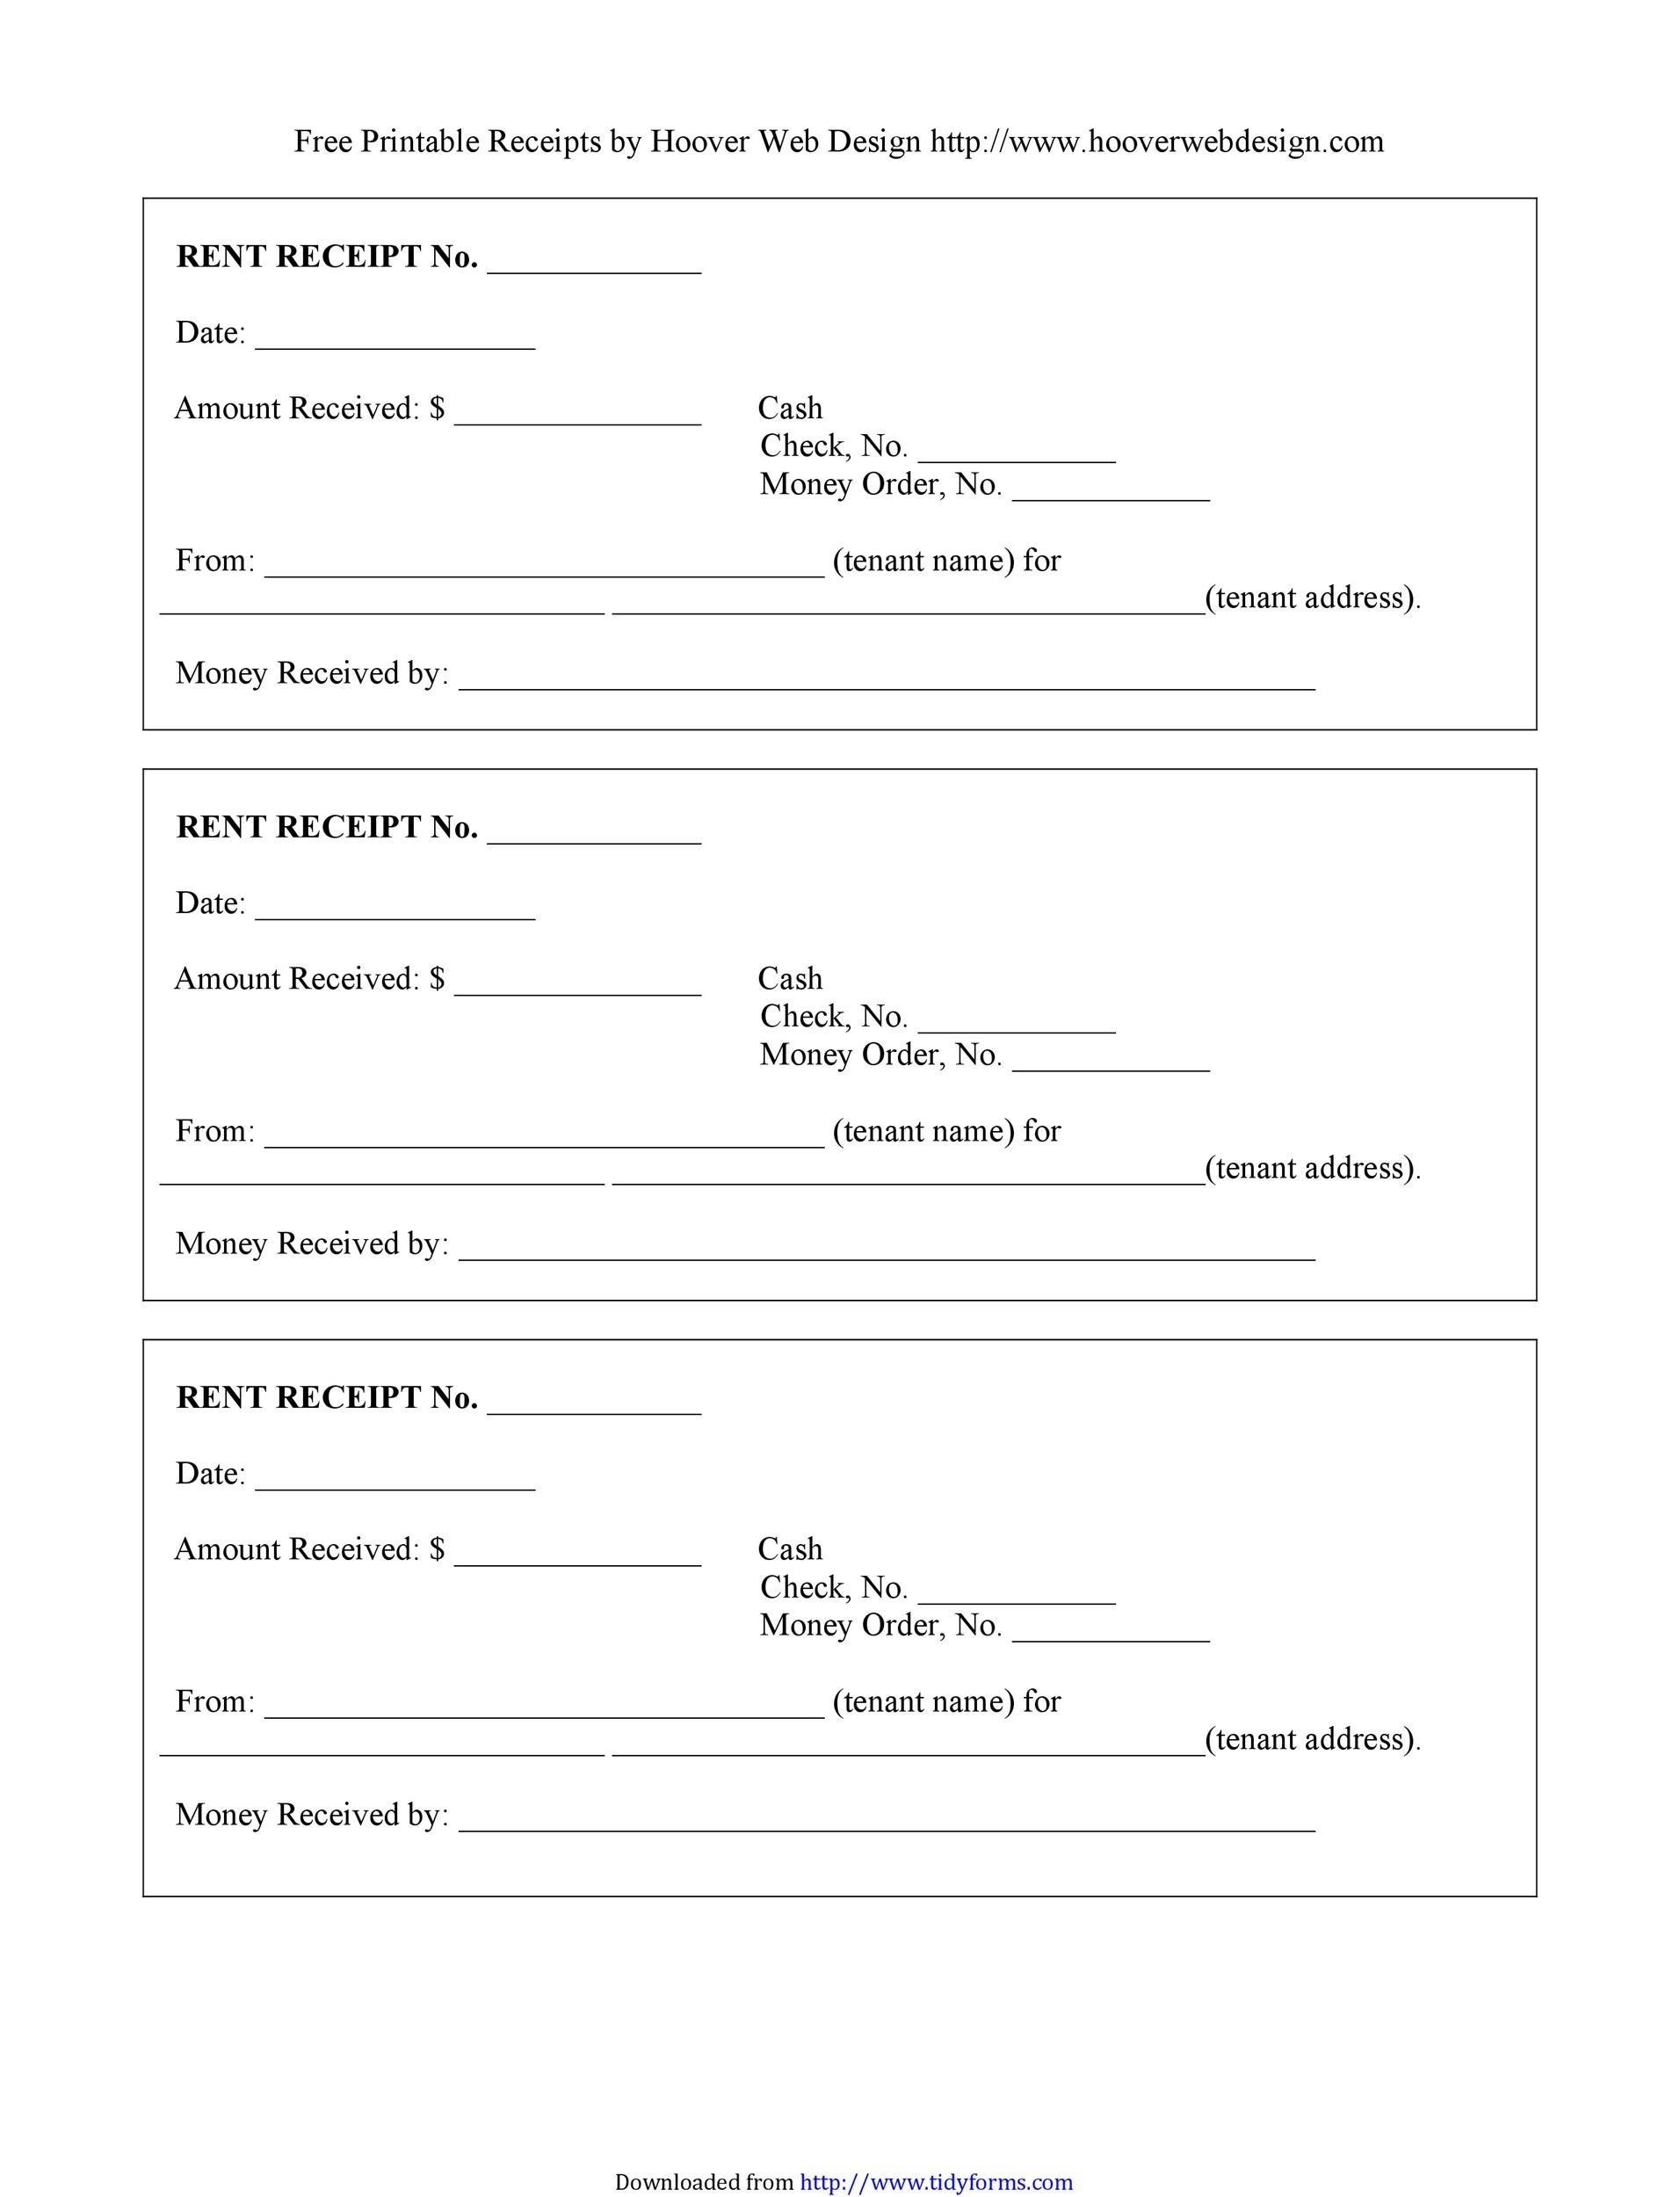 Rent Receipt Template Download This Printable Rent Receipt Template Images And Photos Finder